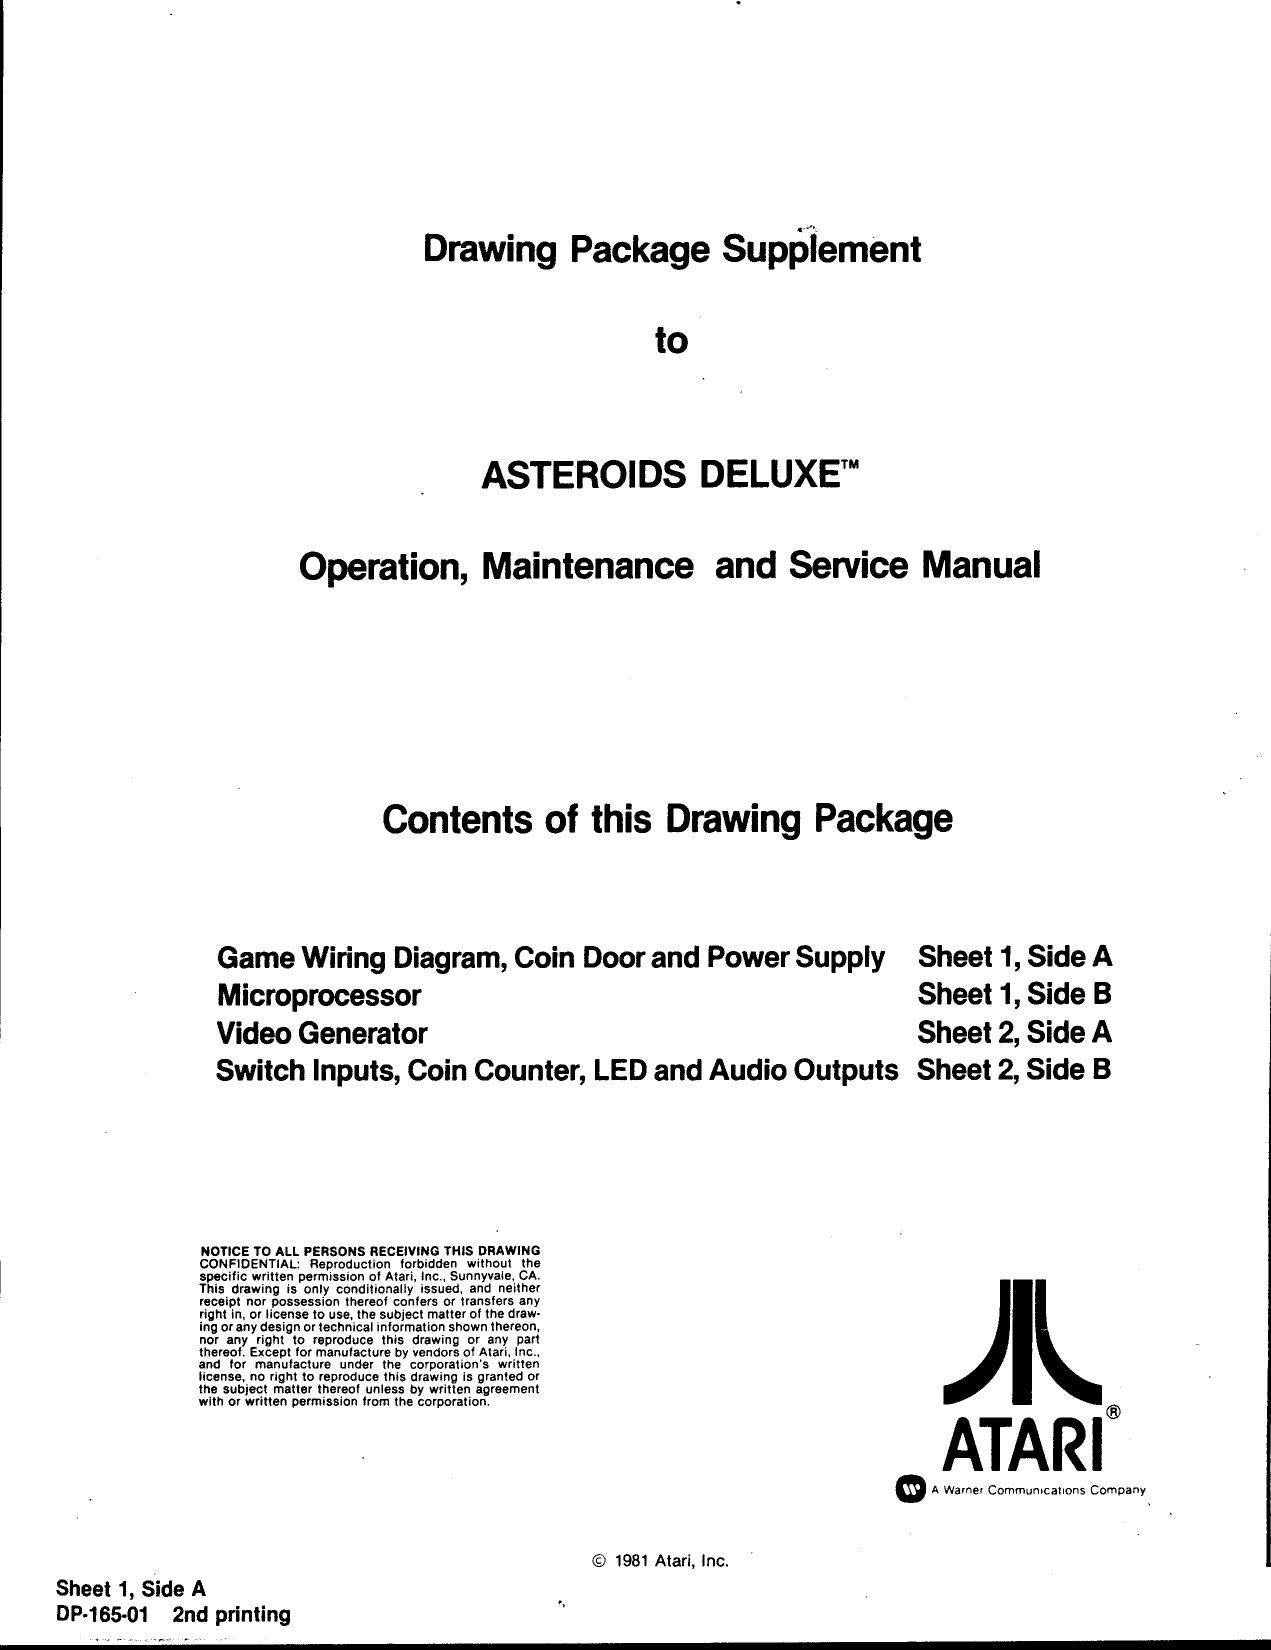 Asteroids Deluxe DP-165 2nd Printing